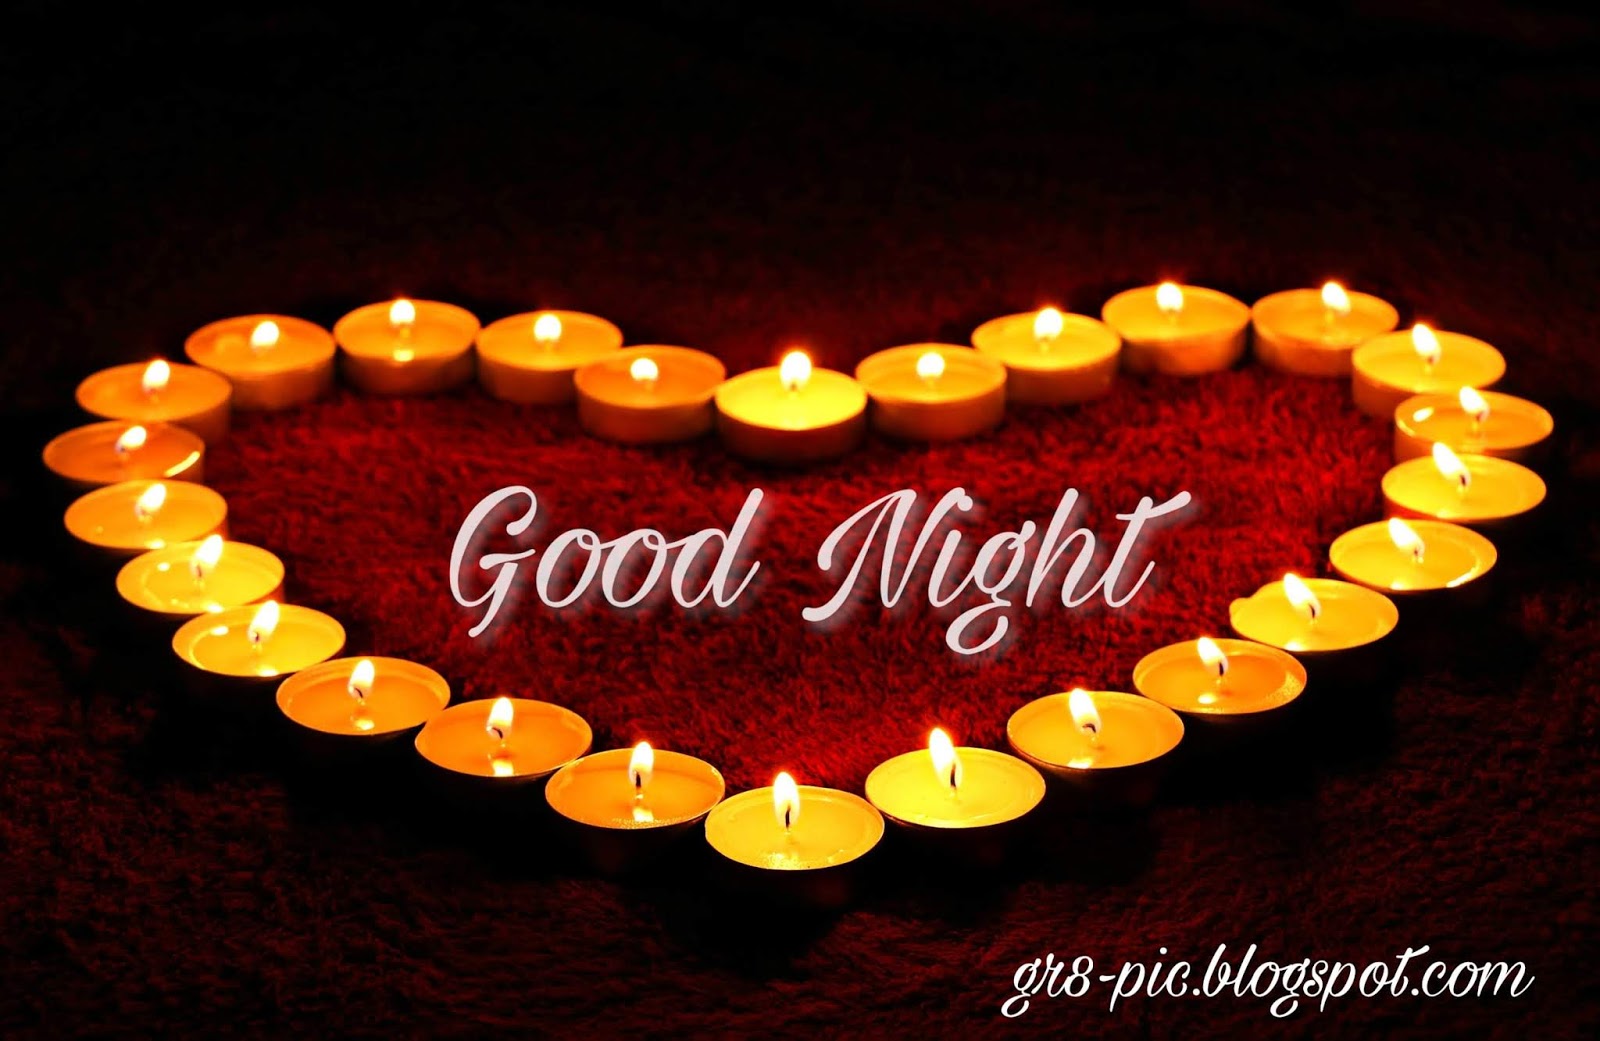 Good Night heart images download | goodnight images | heart images